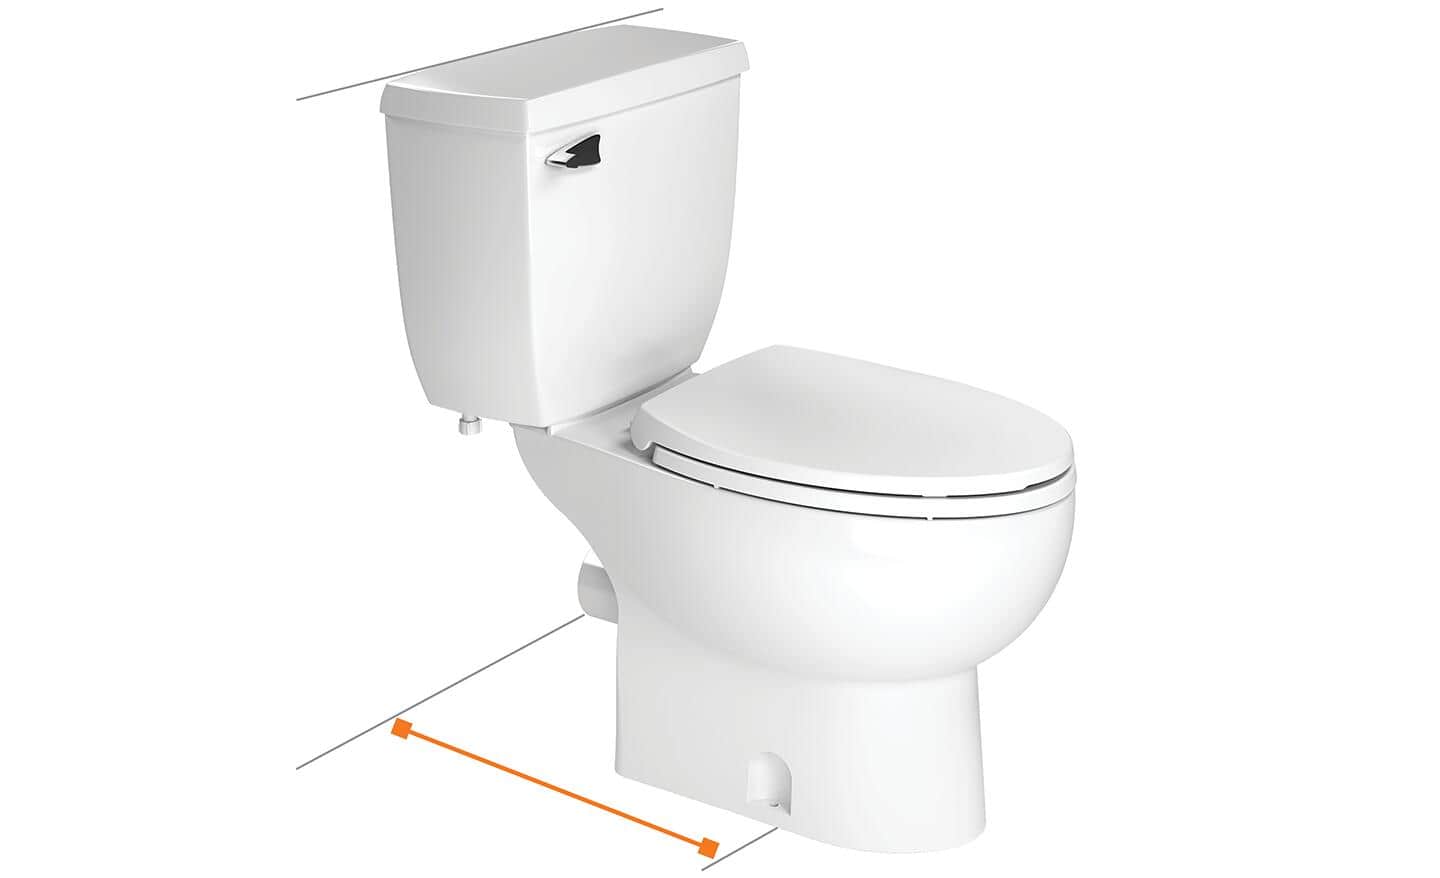 Measuring instructions for determining the rough-in for a two-piece toilet.